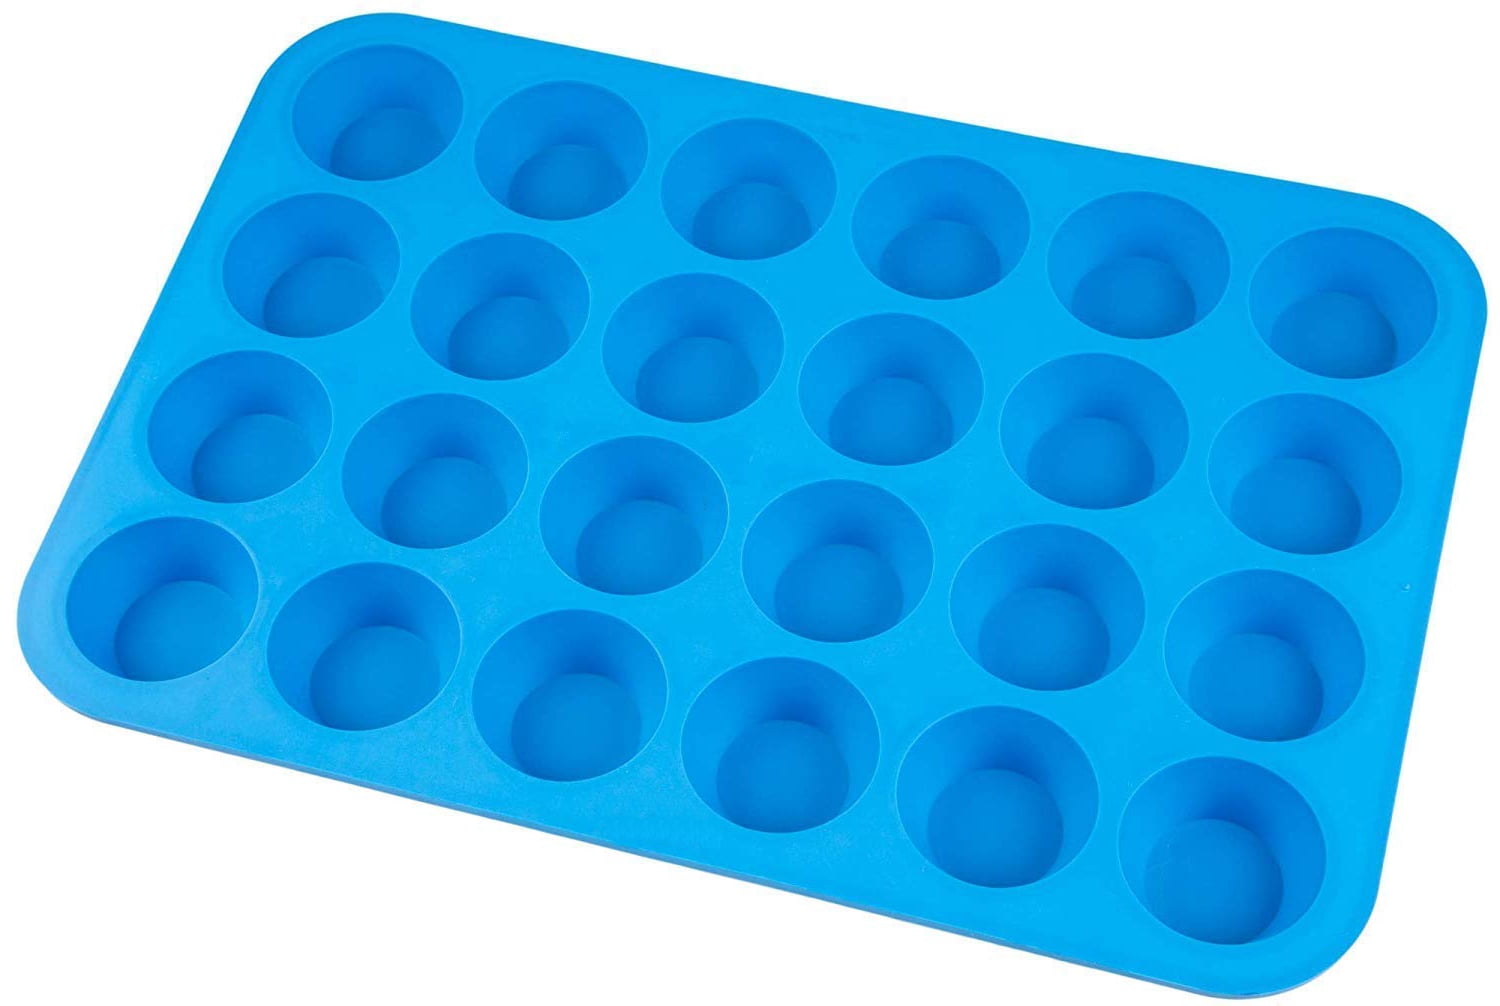 100% Silicone & Dishwasher Safe Silicon Bakeware Pans/Tin Free Recipe eBook Blue Kitchen Rubber Tray & Mold for Keto Fat Bombs Silicone Muffin & Cupcake Baking Pan 12 Cup Non Stick BPA Free